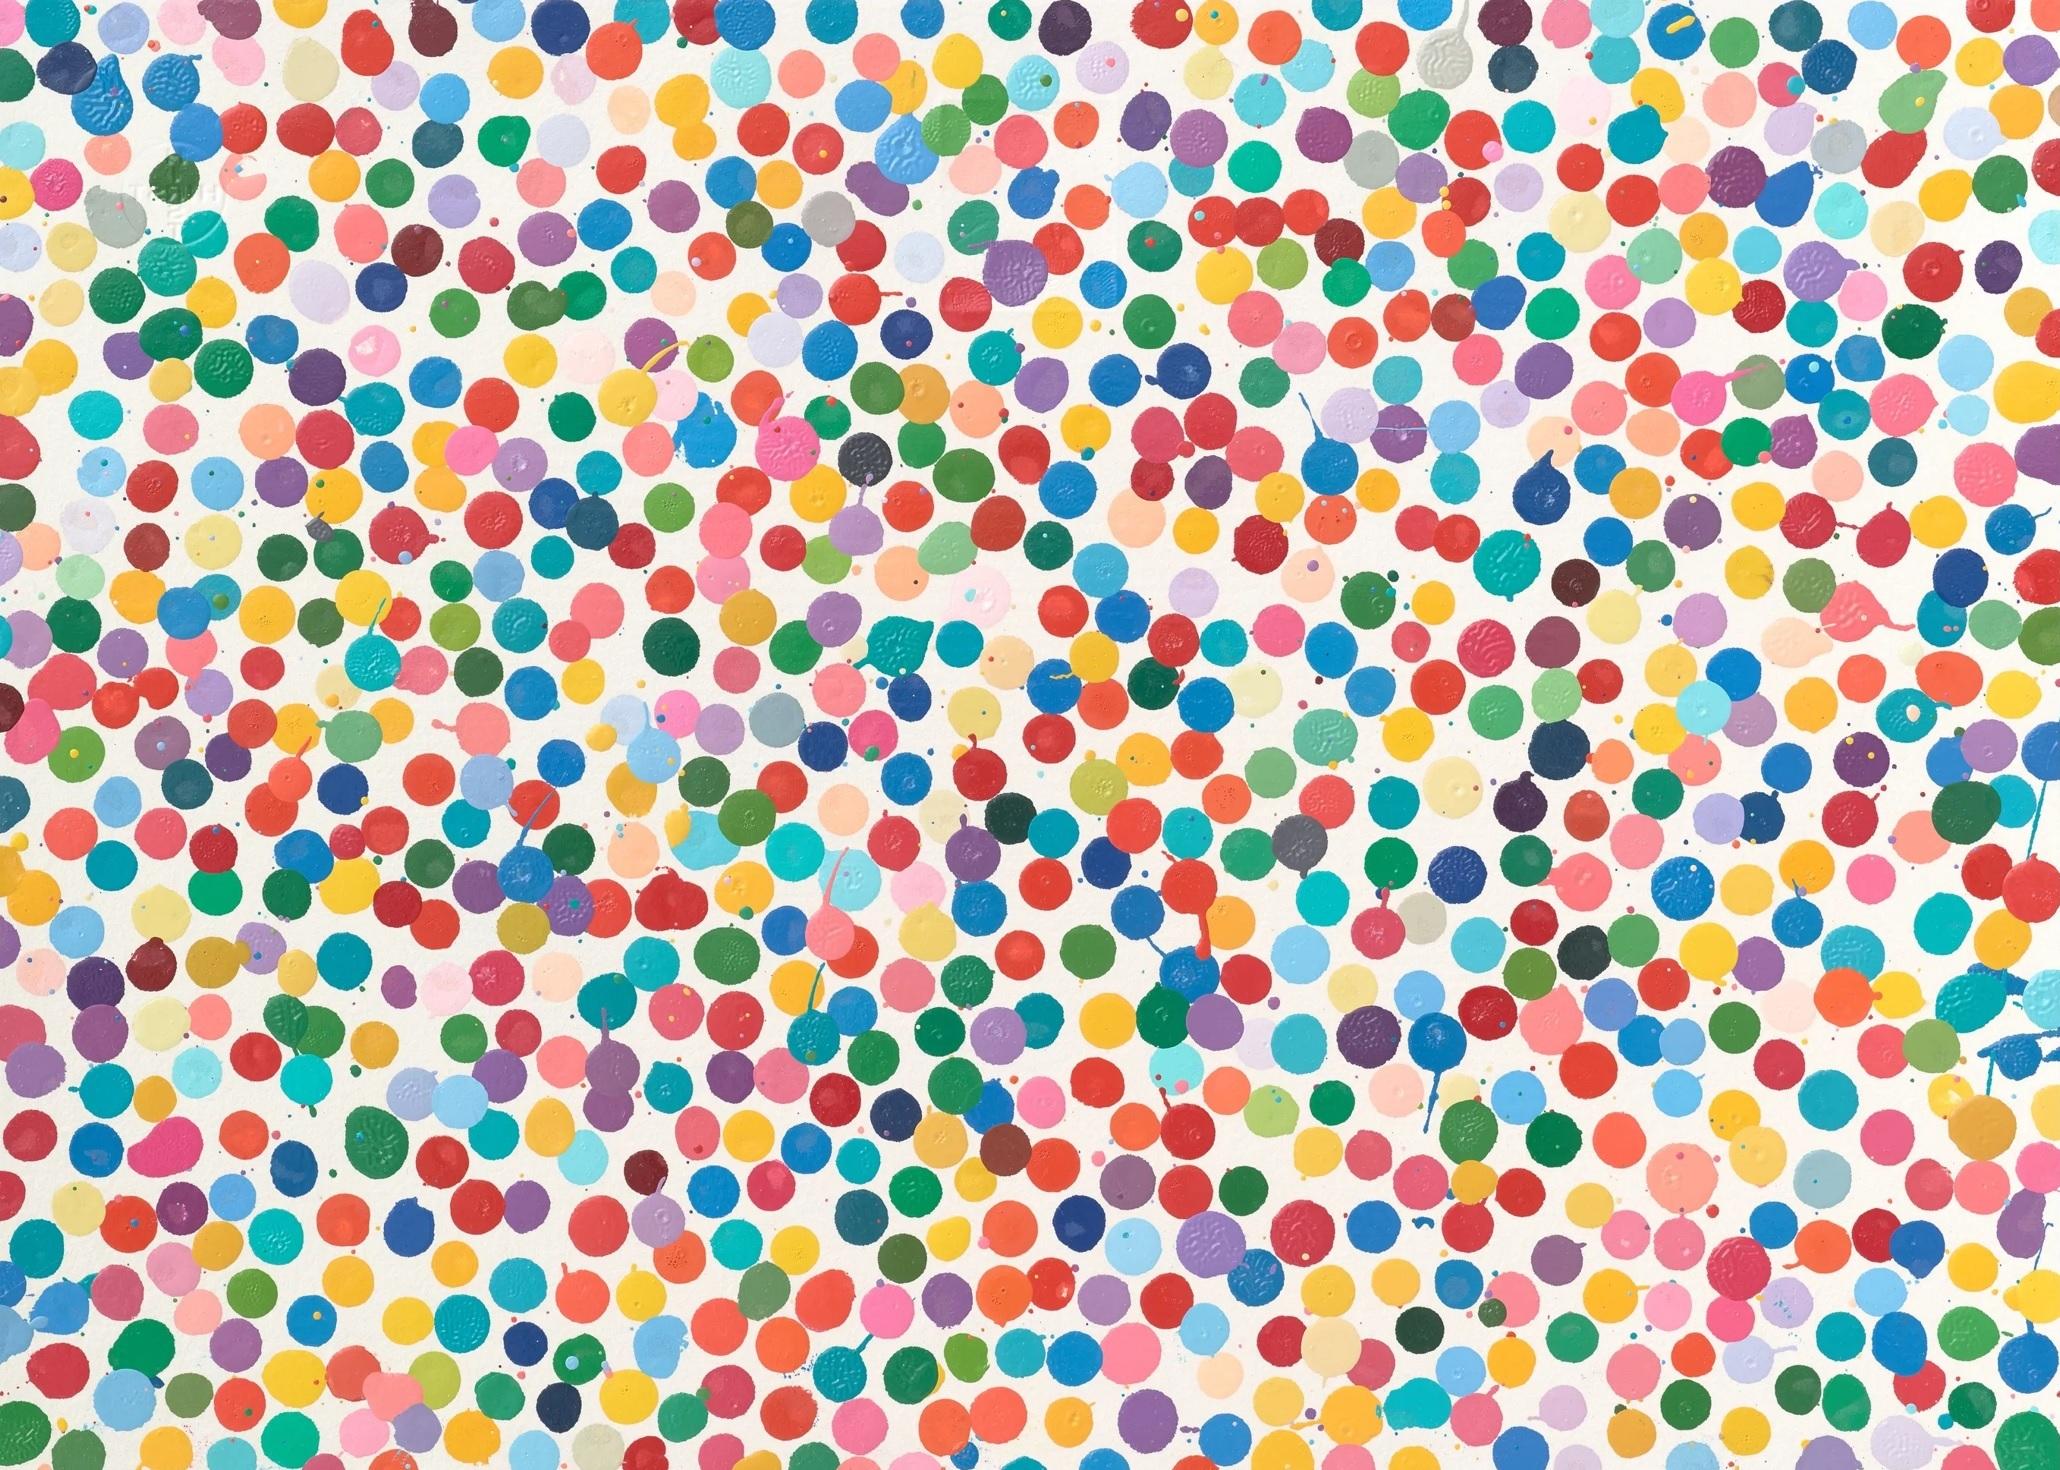 4193. Mouths are planted (The Currency) 2016-2021, Limited edition, Enamel paint - Beige Abstract Print by Damien Hirst